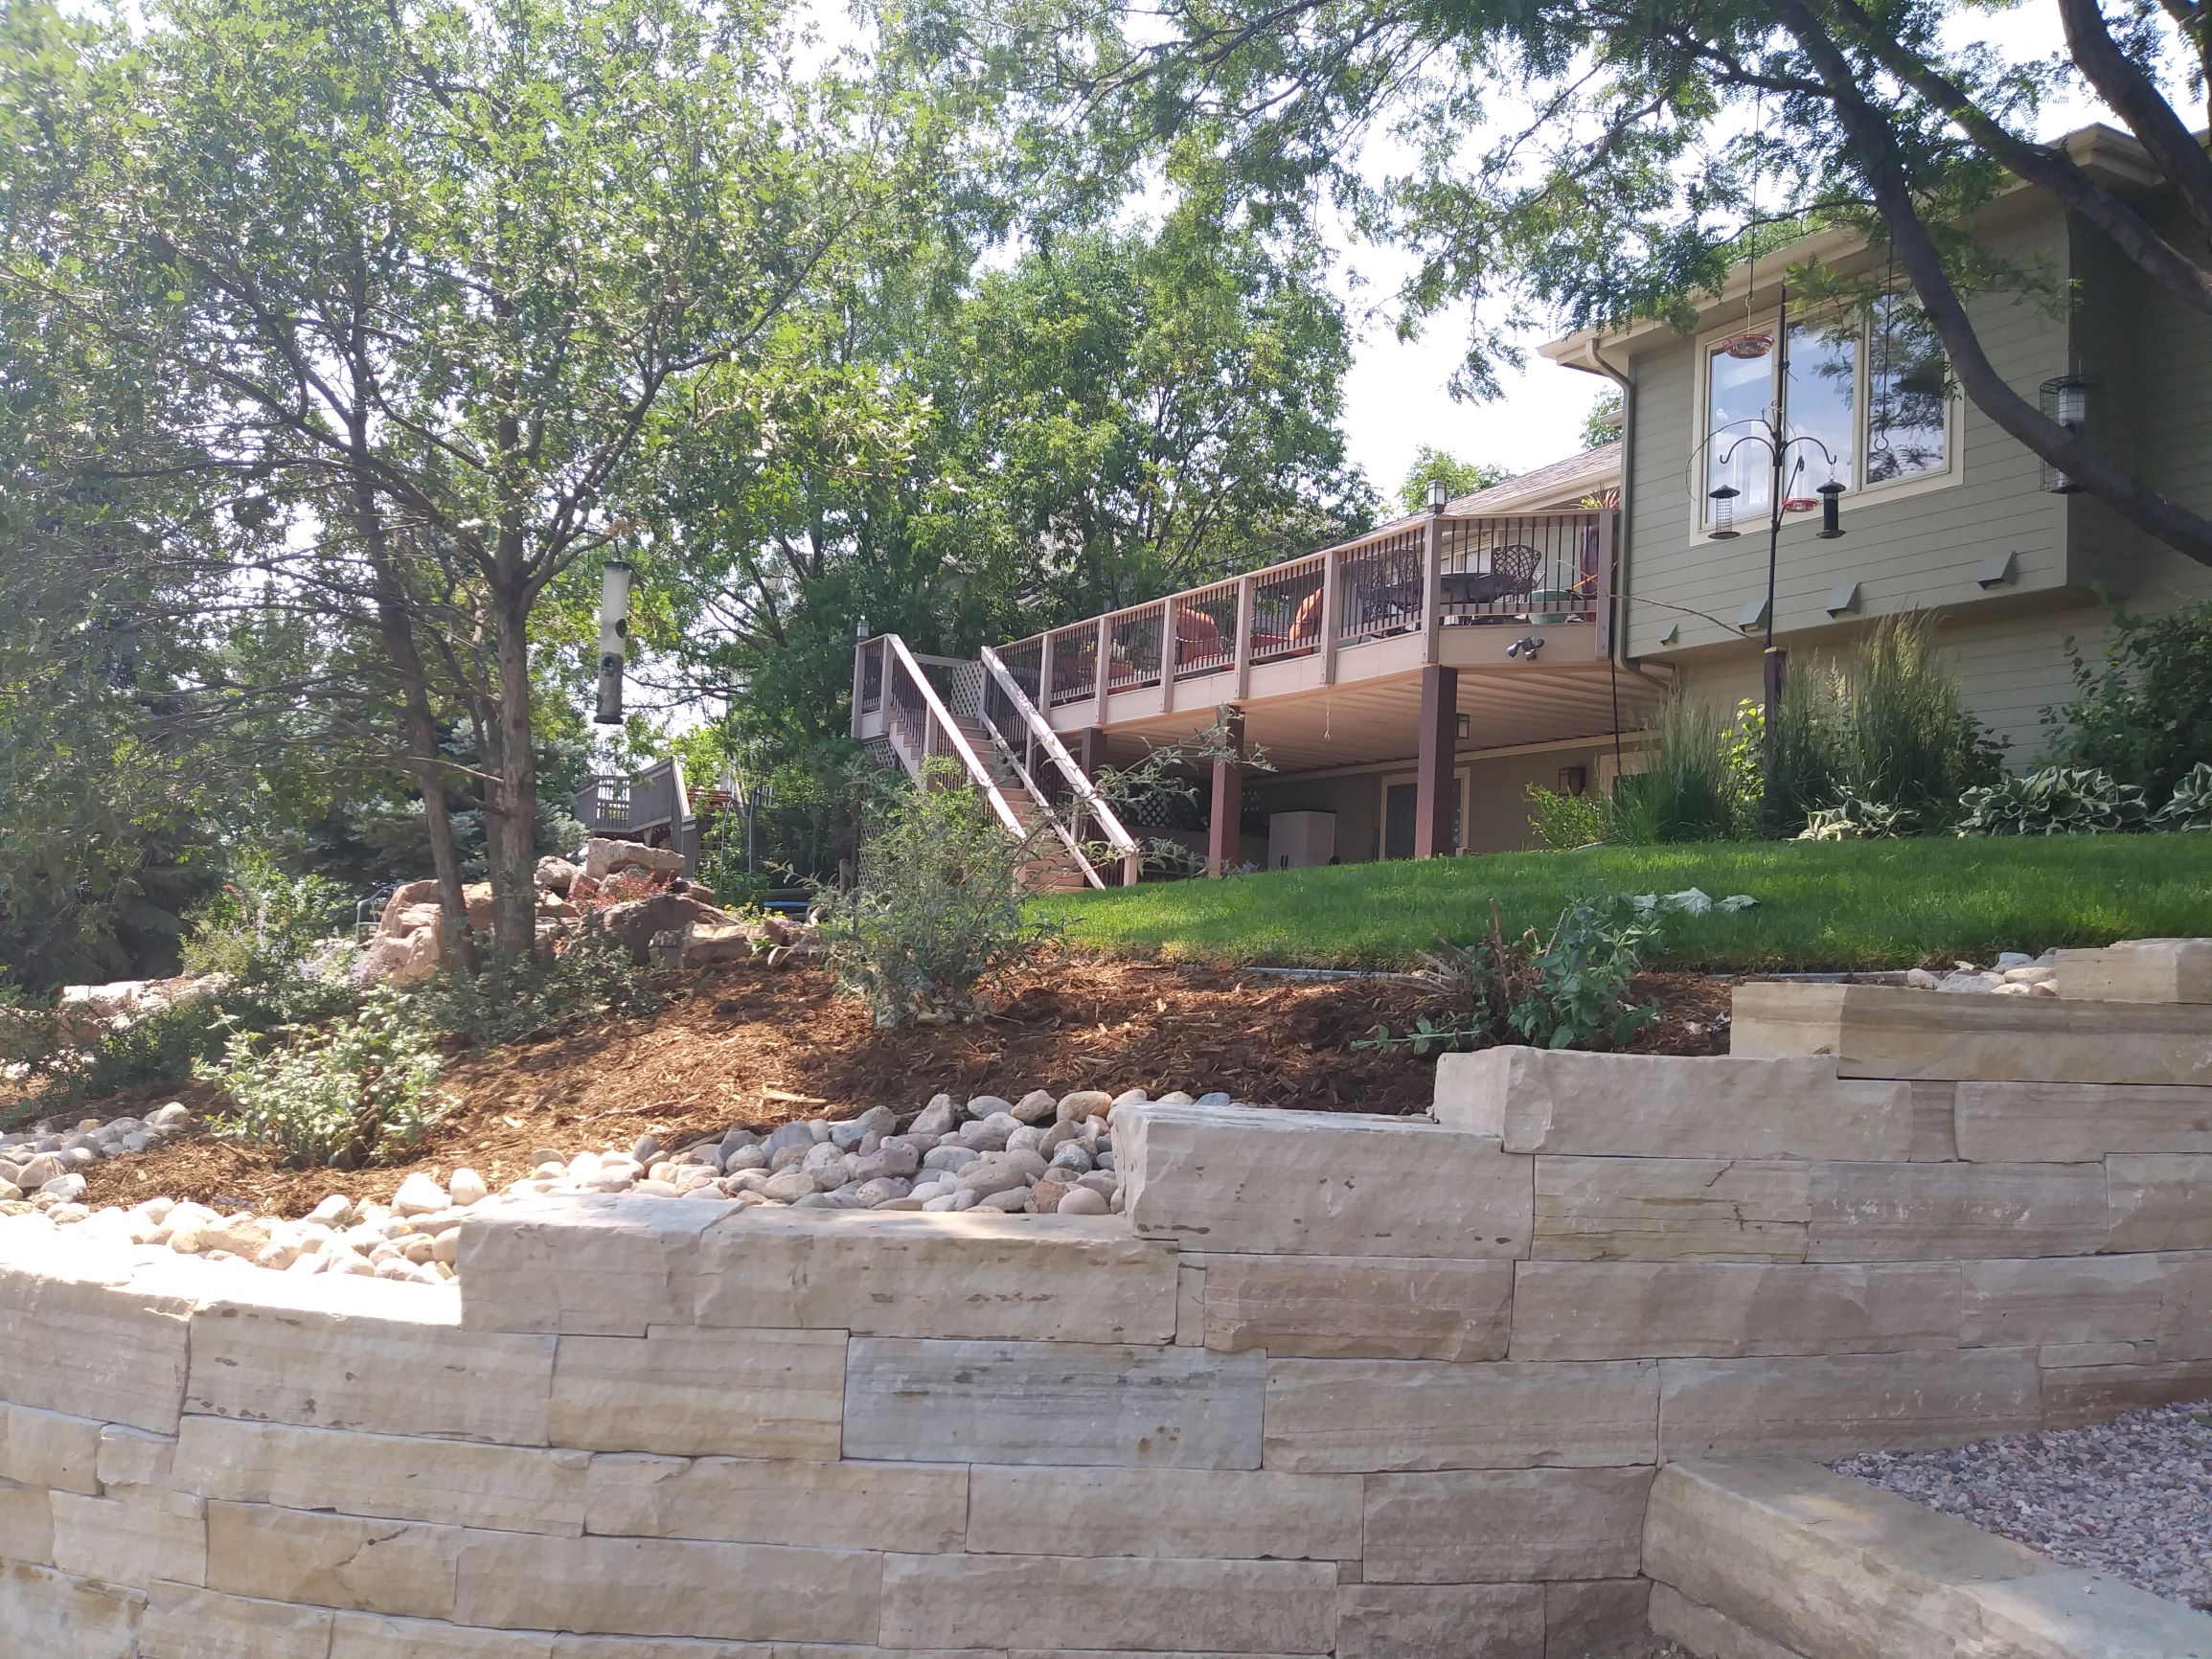 Flat stone retaining wall. large rocks and mulch with plants and bushes placed through out.